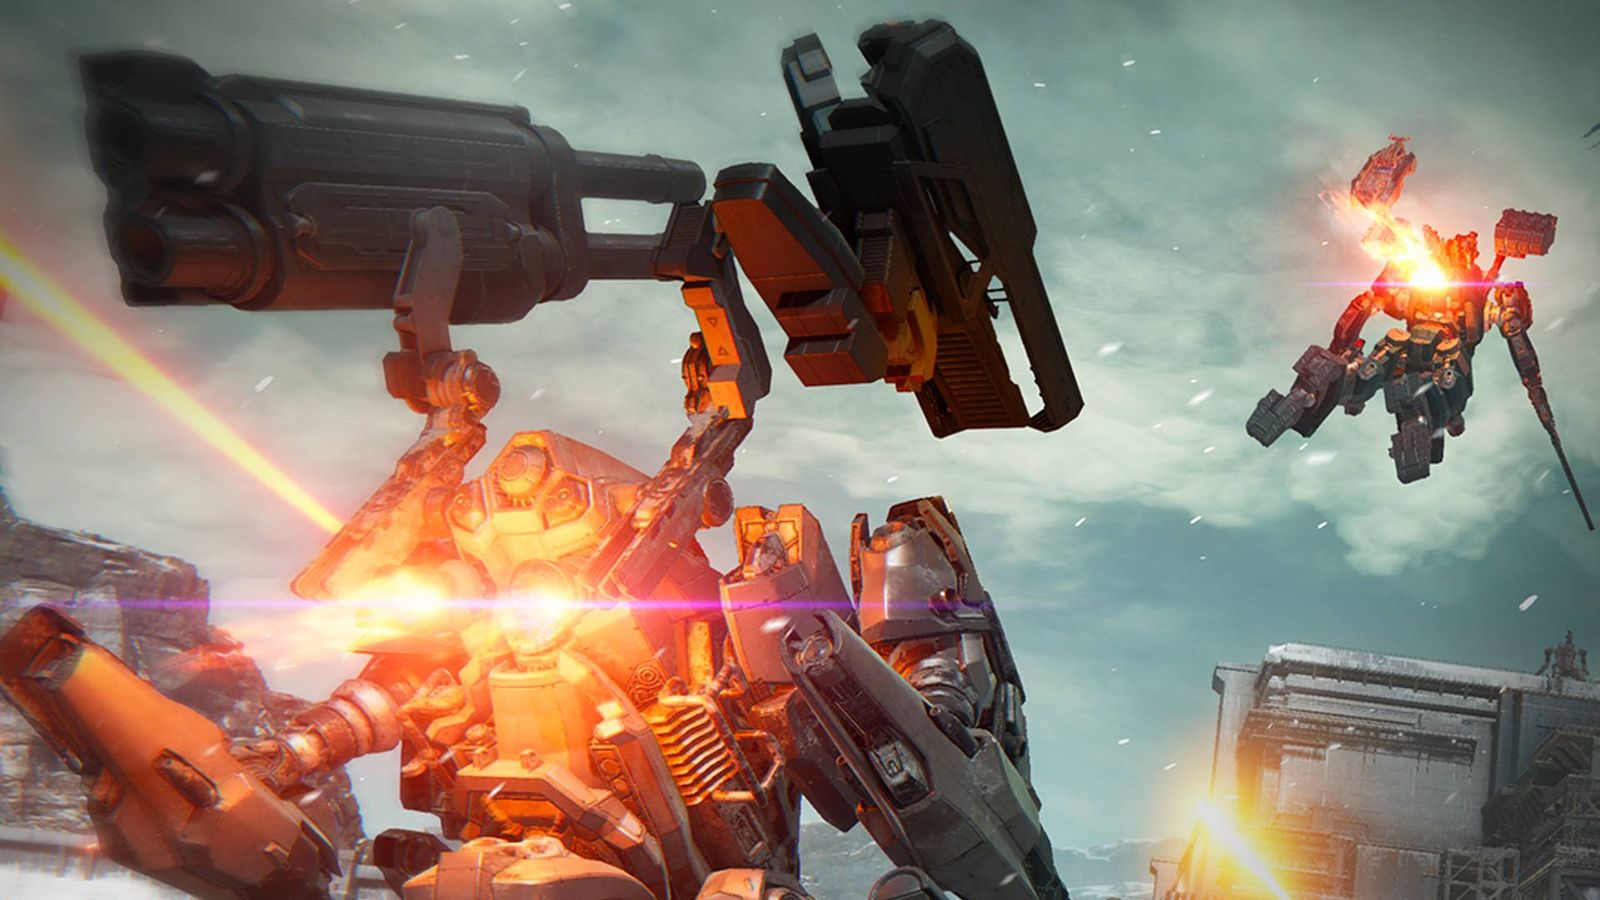 Two mechs fighting in Armored Core 6.